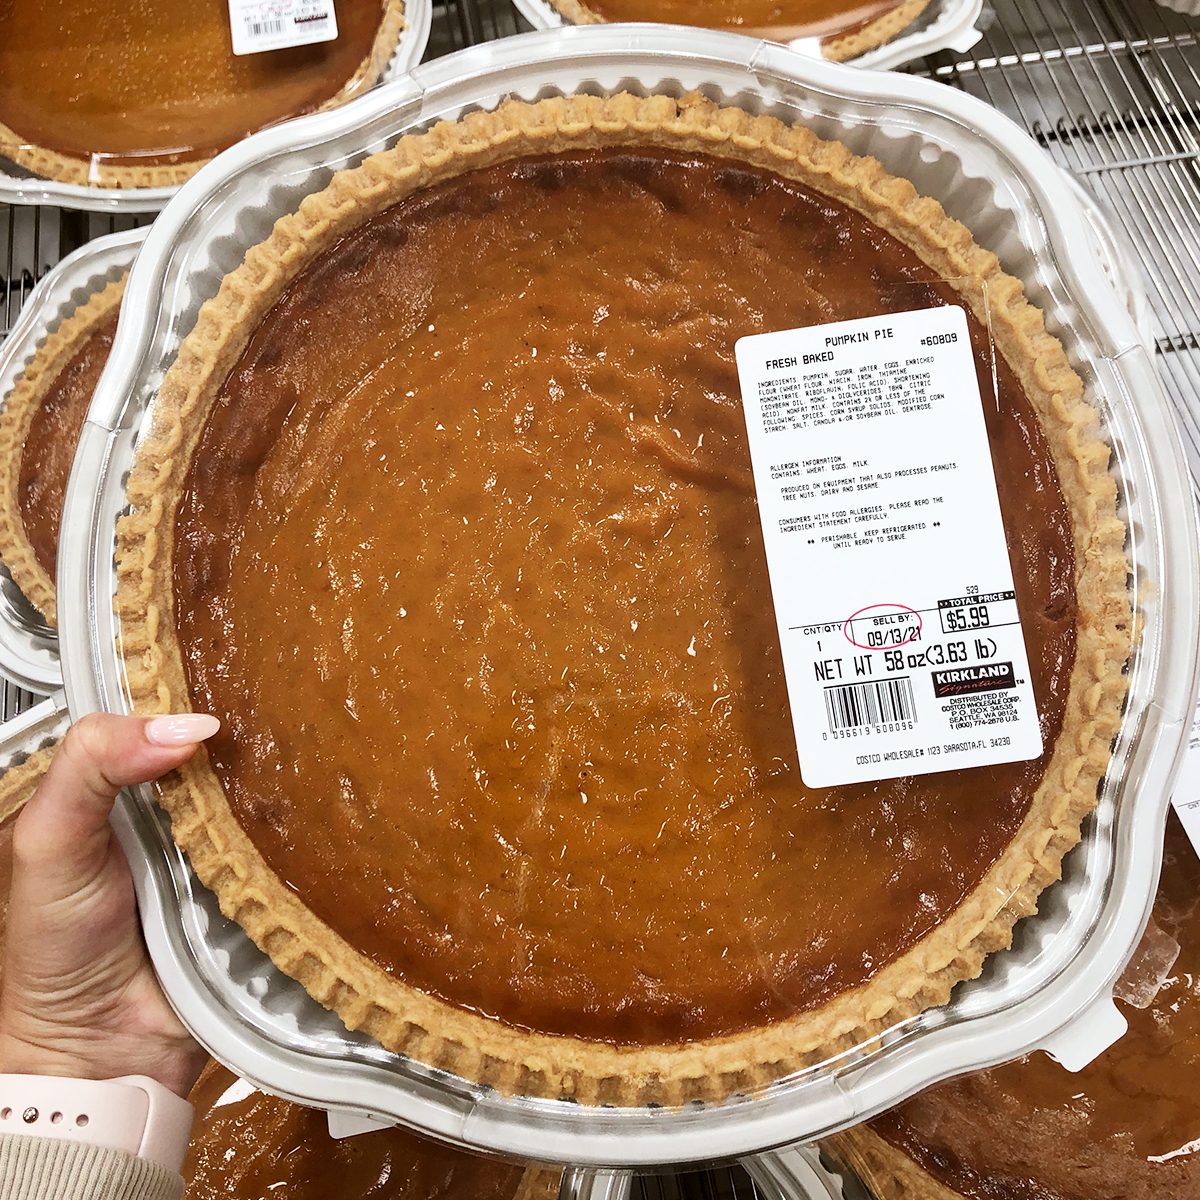 costco-pumpkin-pie-does-it-need-to-be-refrigerated